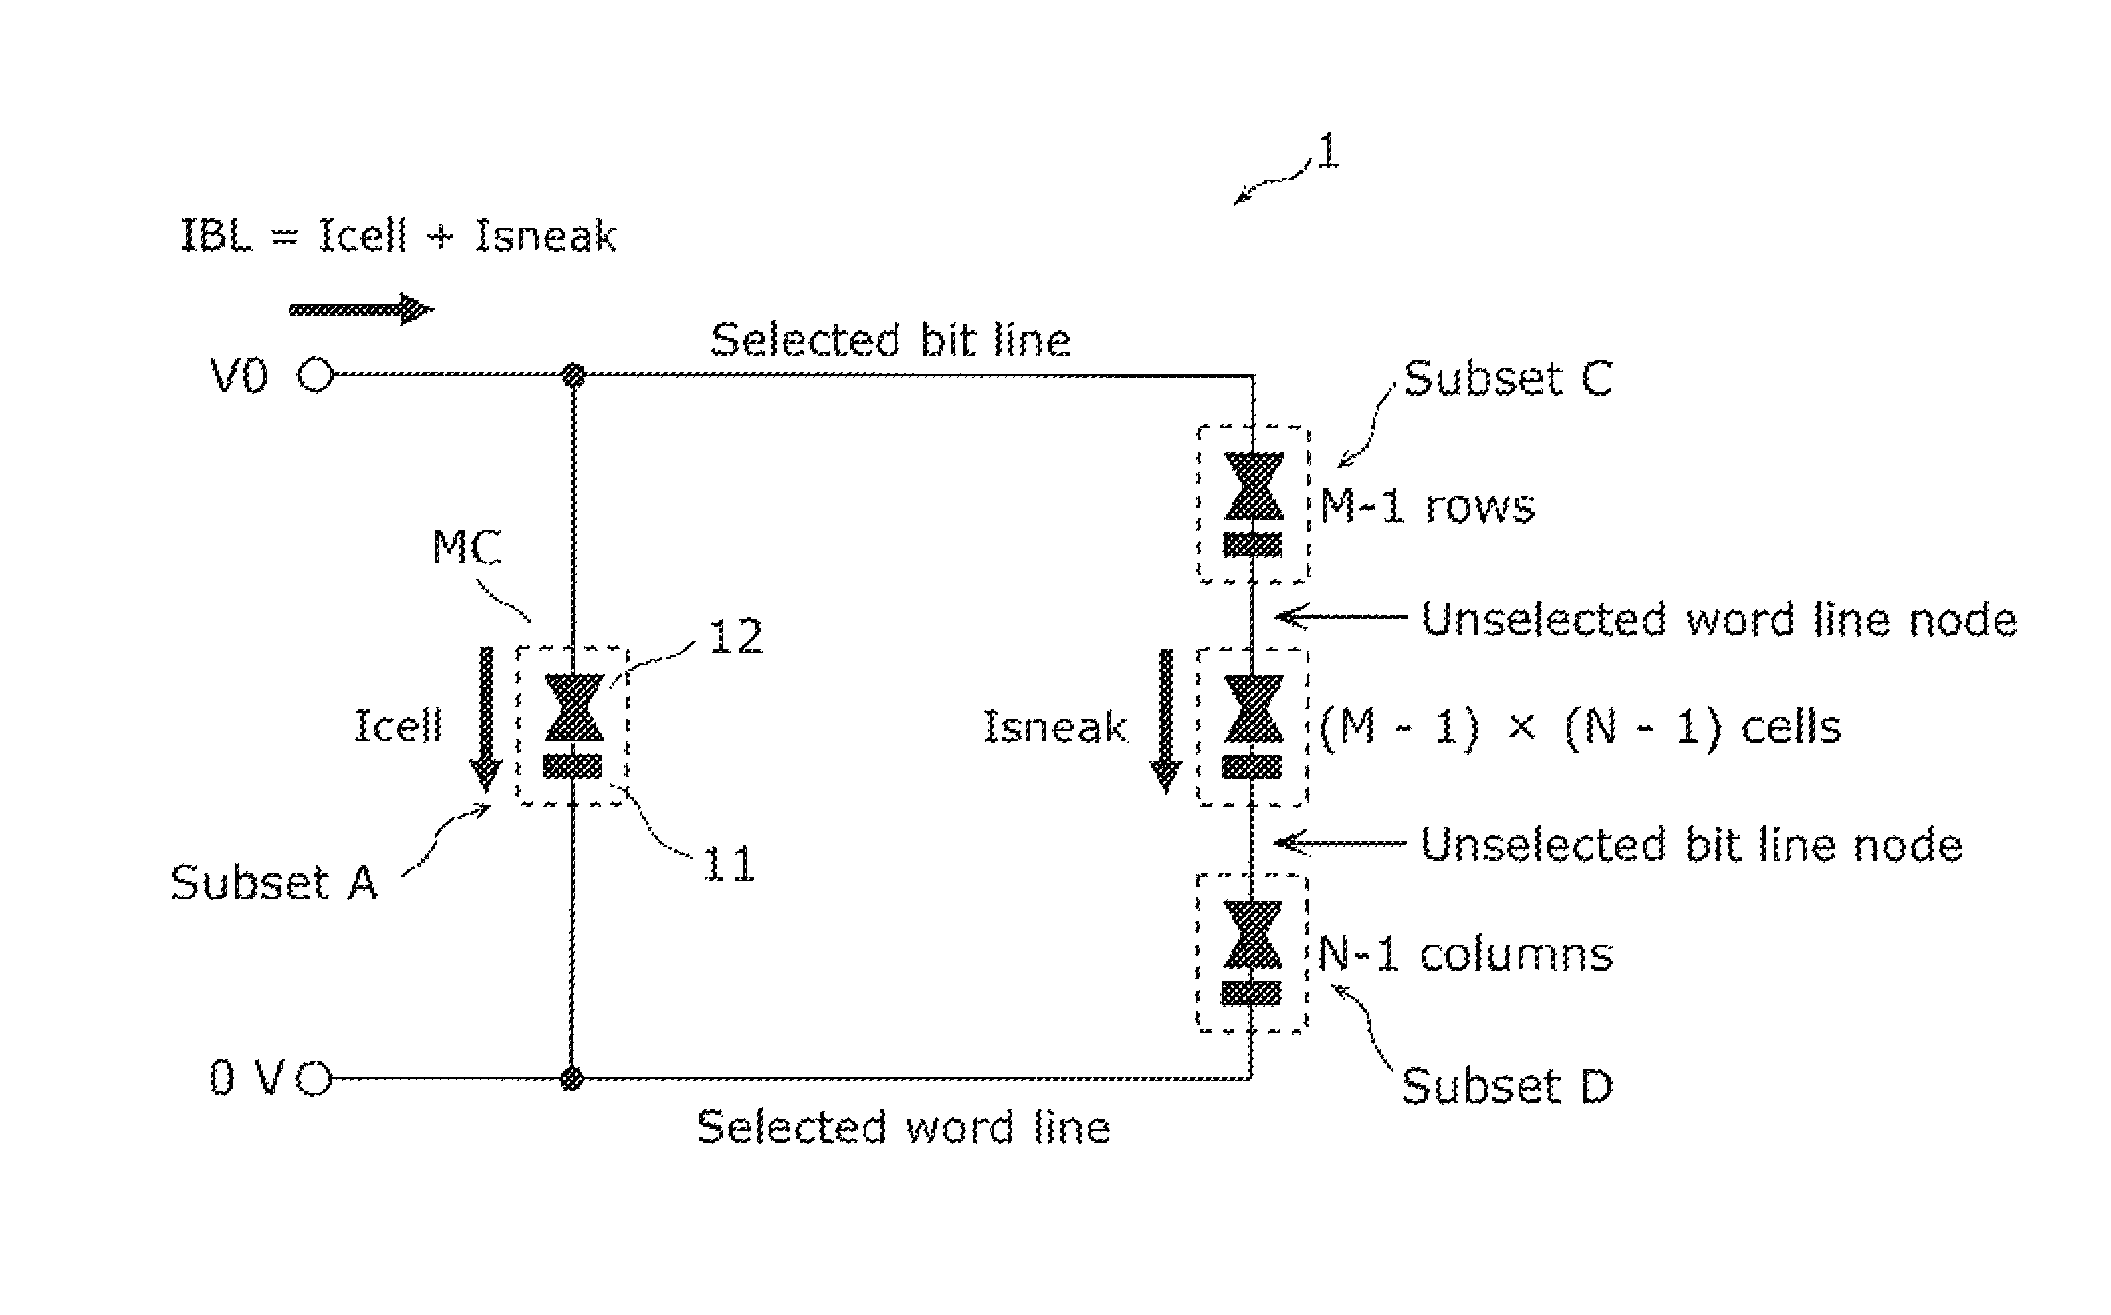 Nonvolatile semiconductor memory device and read method for the same